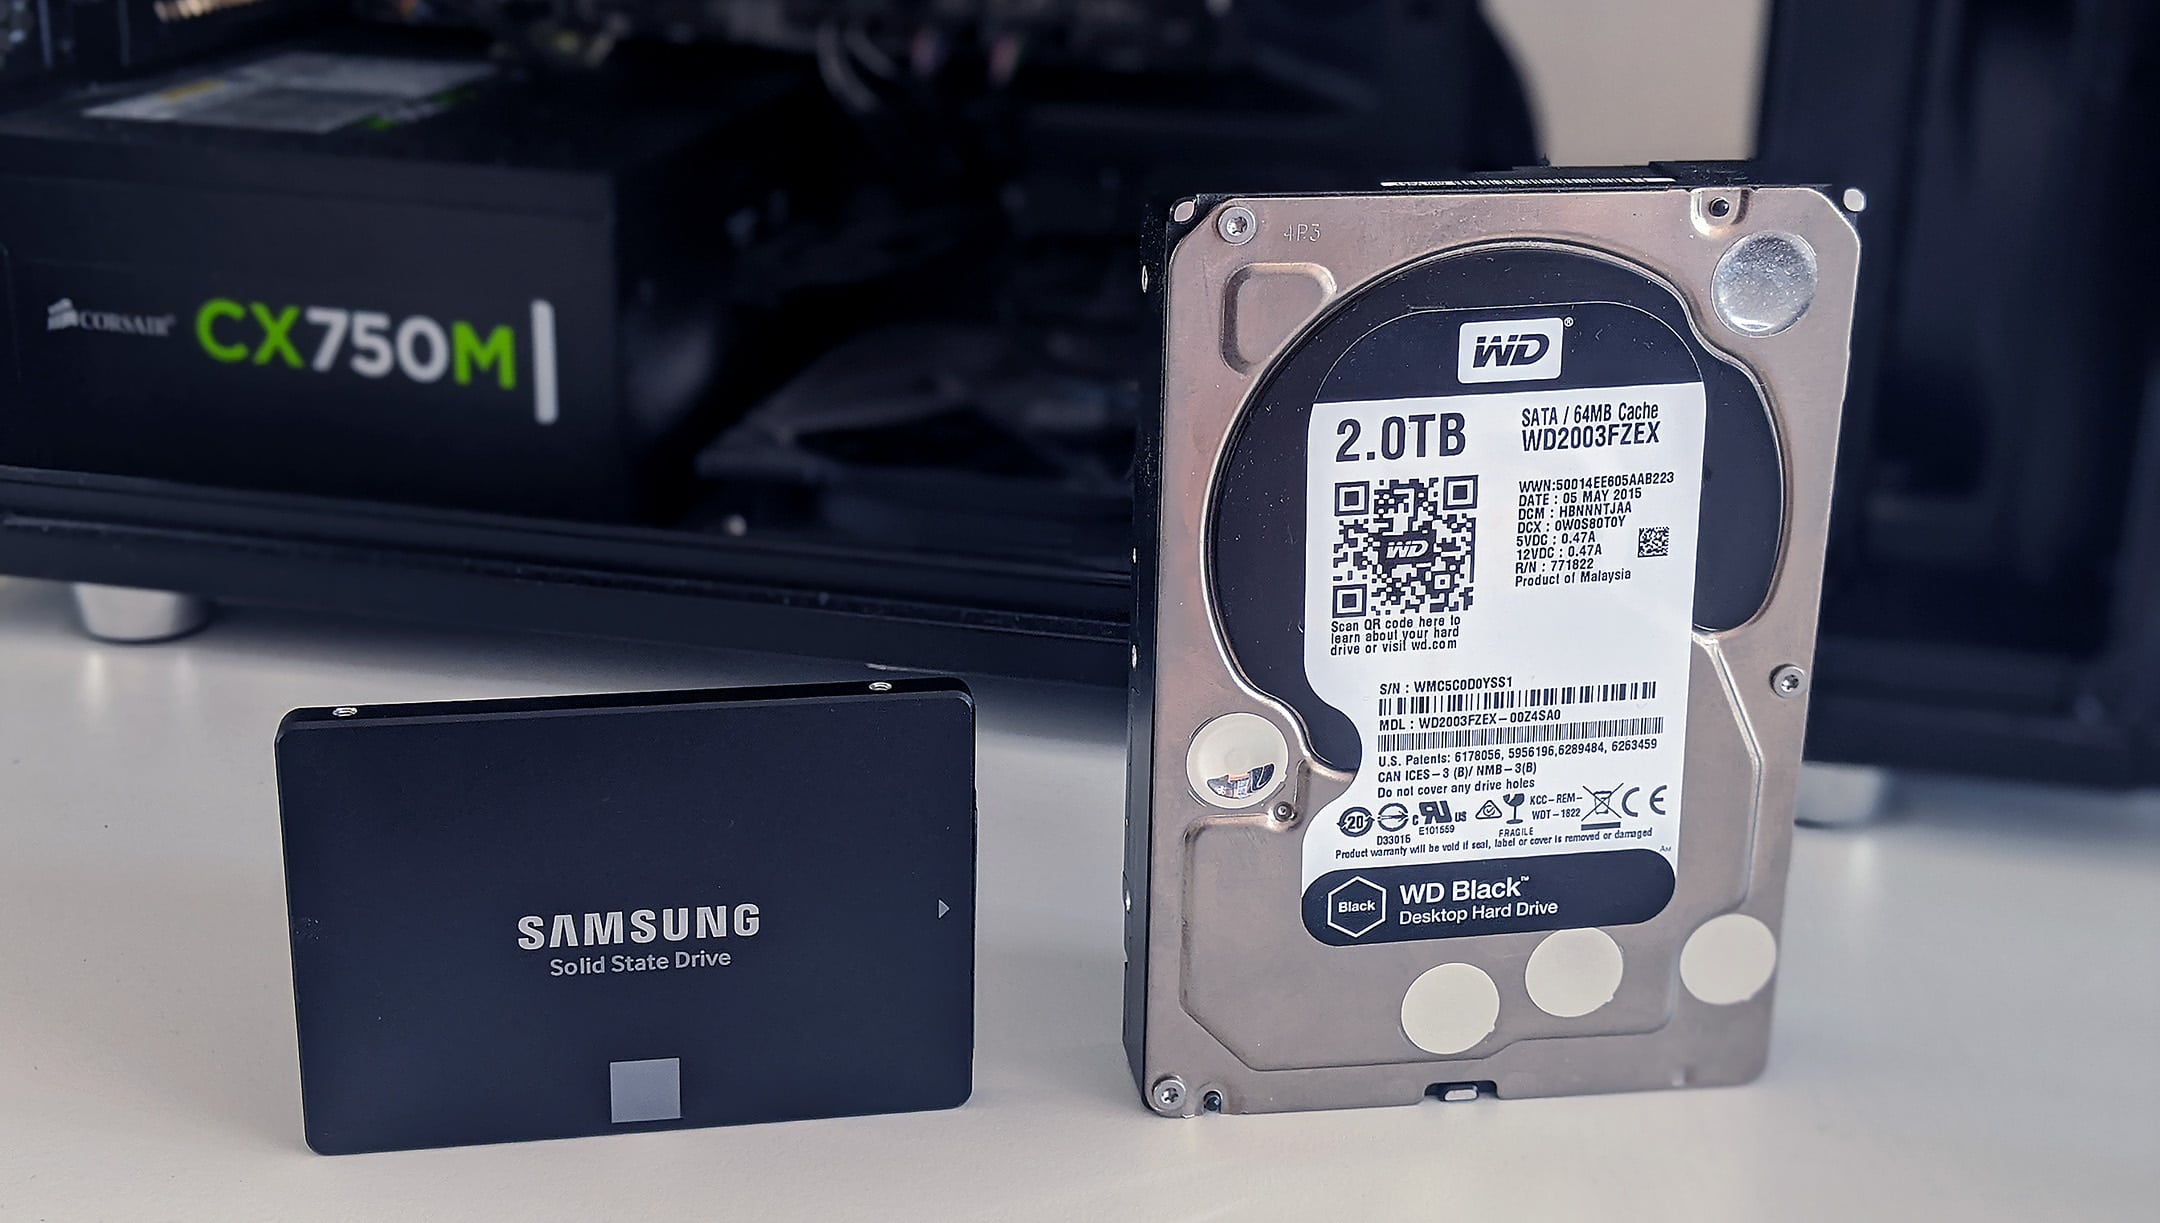 Which Is Better: 256GB Solid State Drive Or 1TB 5400 RPM Hard Drive?